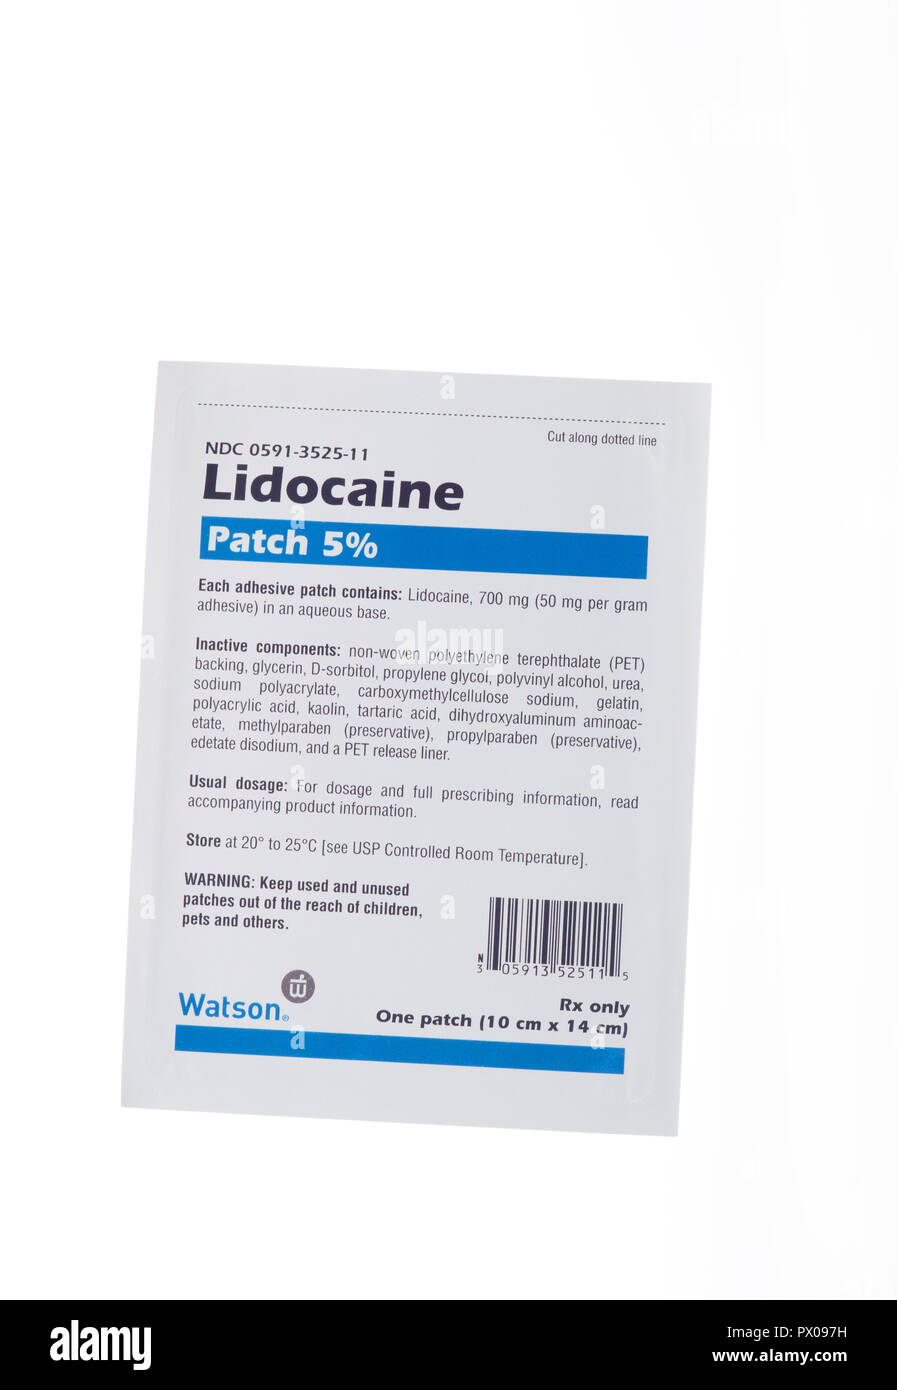 A Lidocaine 5 percent transdermal adhesive patch for pain relief made by Watson Laboratories, Inc. on white Stock Photo